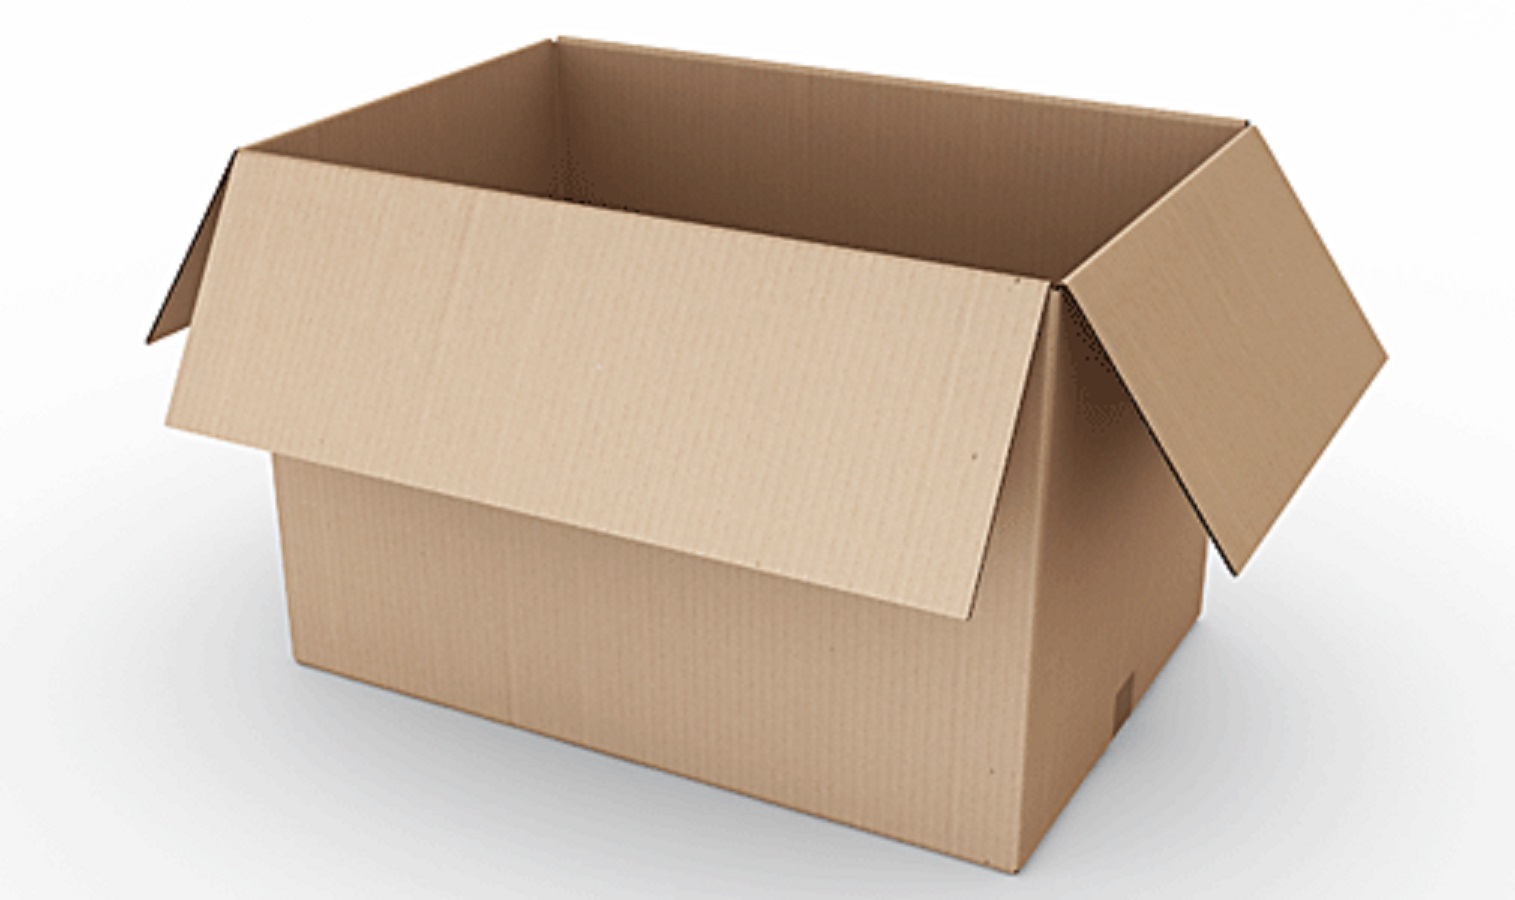 Advantages and applications of Packaging Boxes 1 Layer